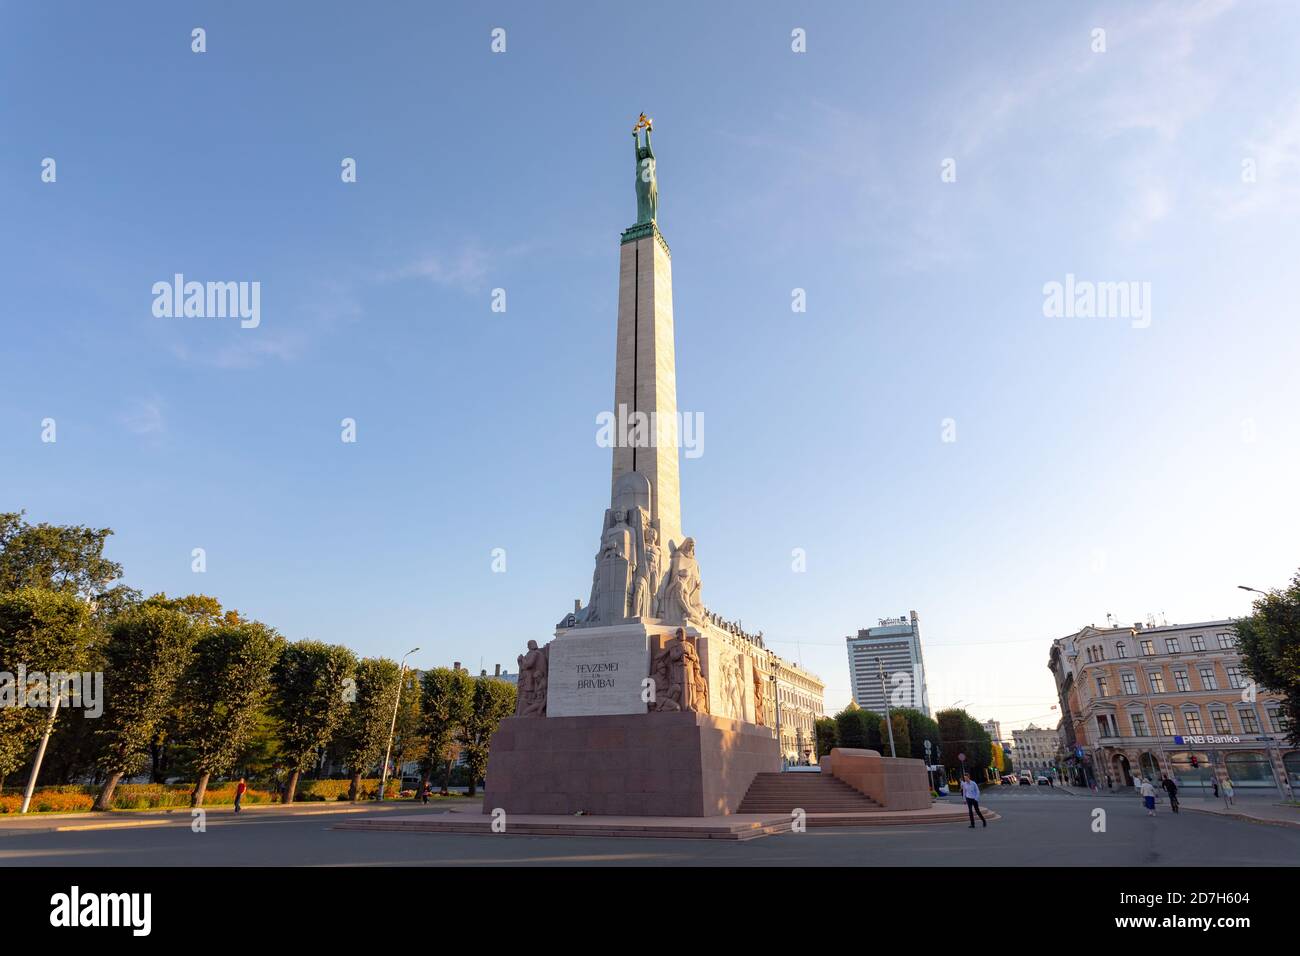 The Freedom Monument statue dedicated to Latvians who lost their lives fighting for independence between 1918 - 1920 Stock Photo